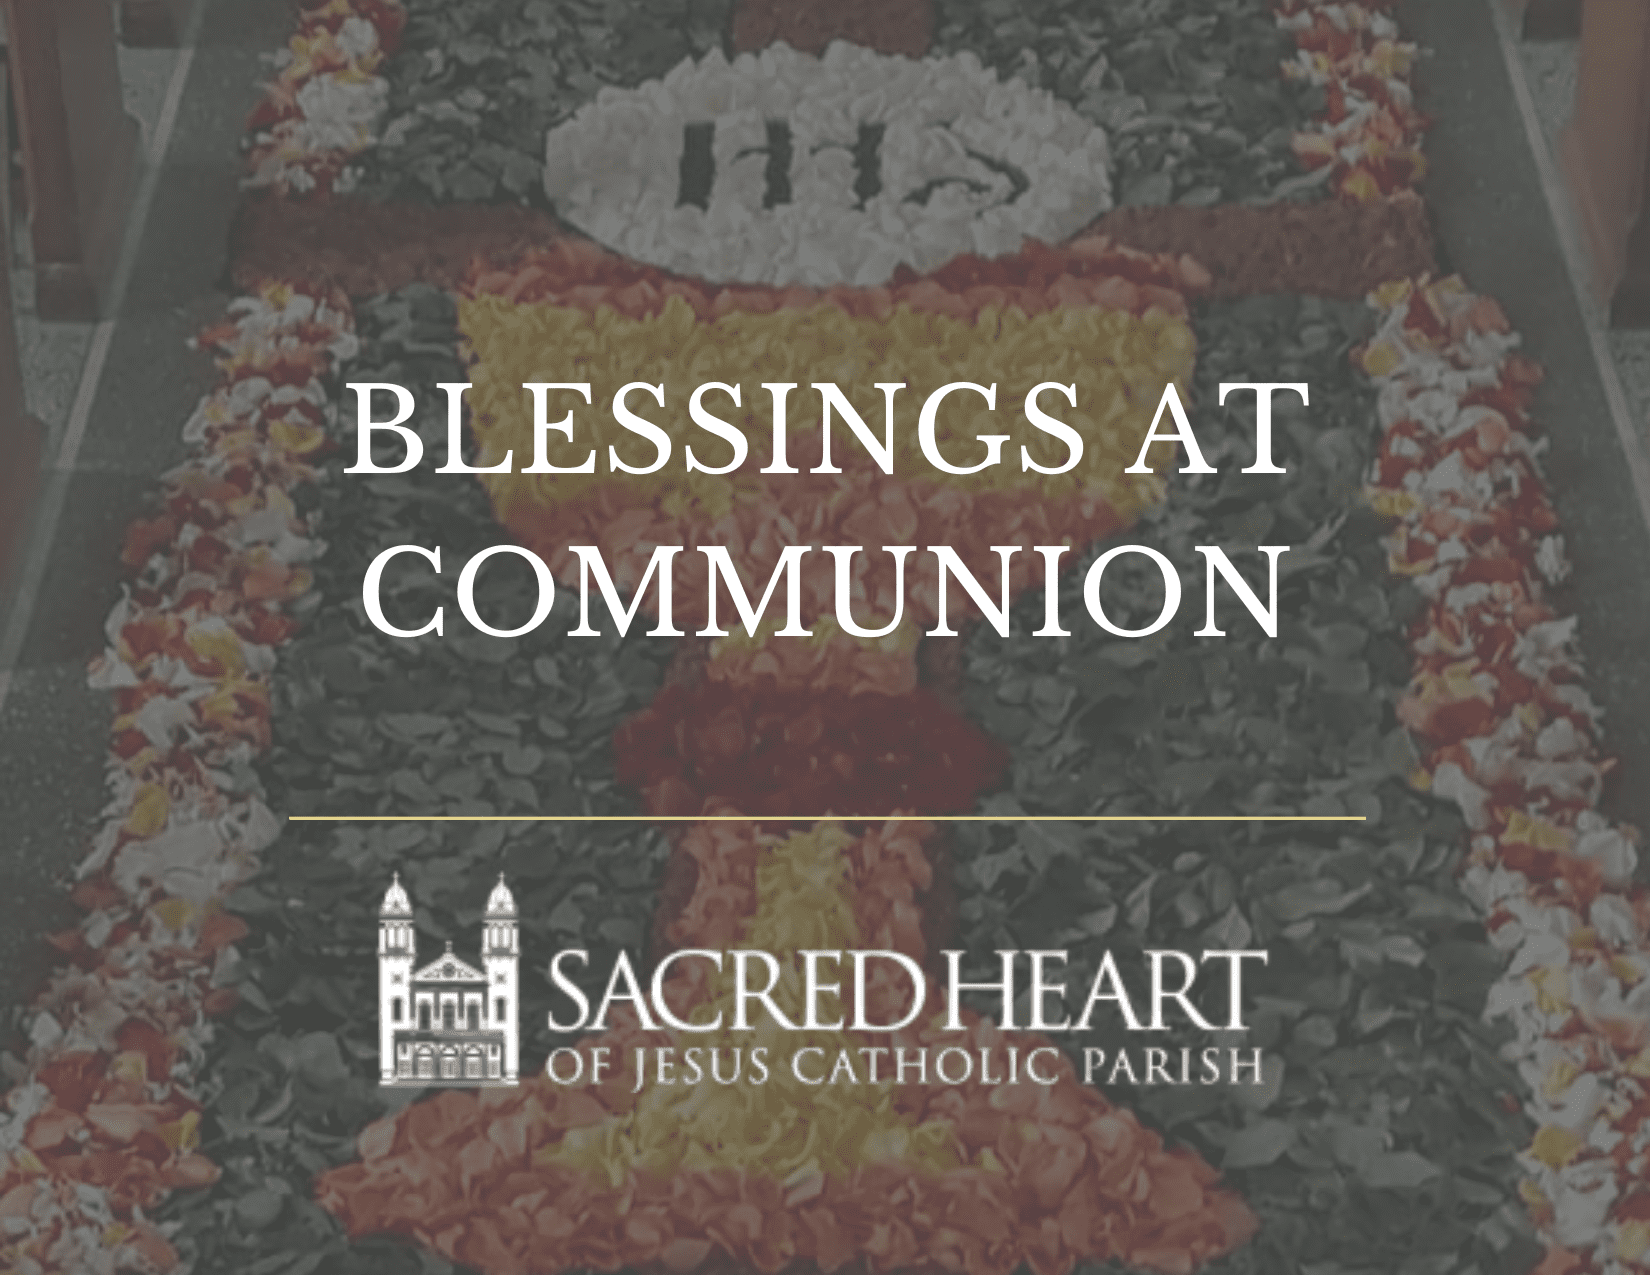 BLESSINGS AT COMMUNION